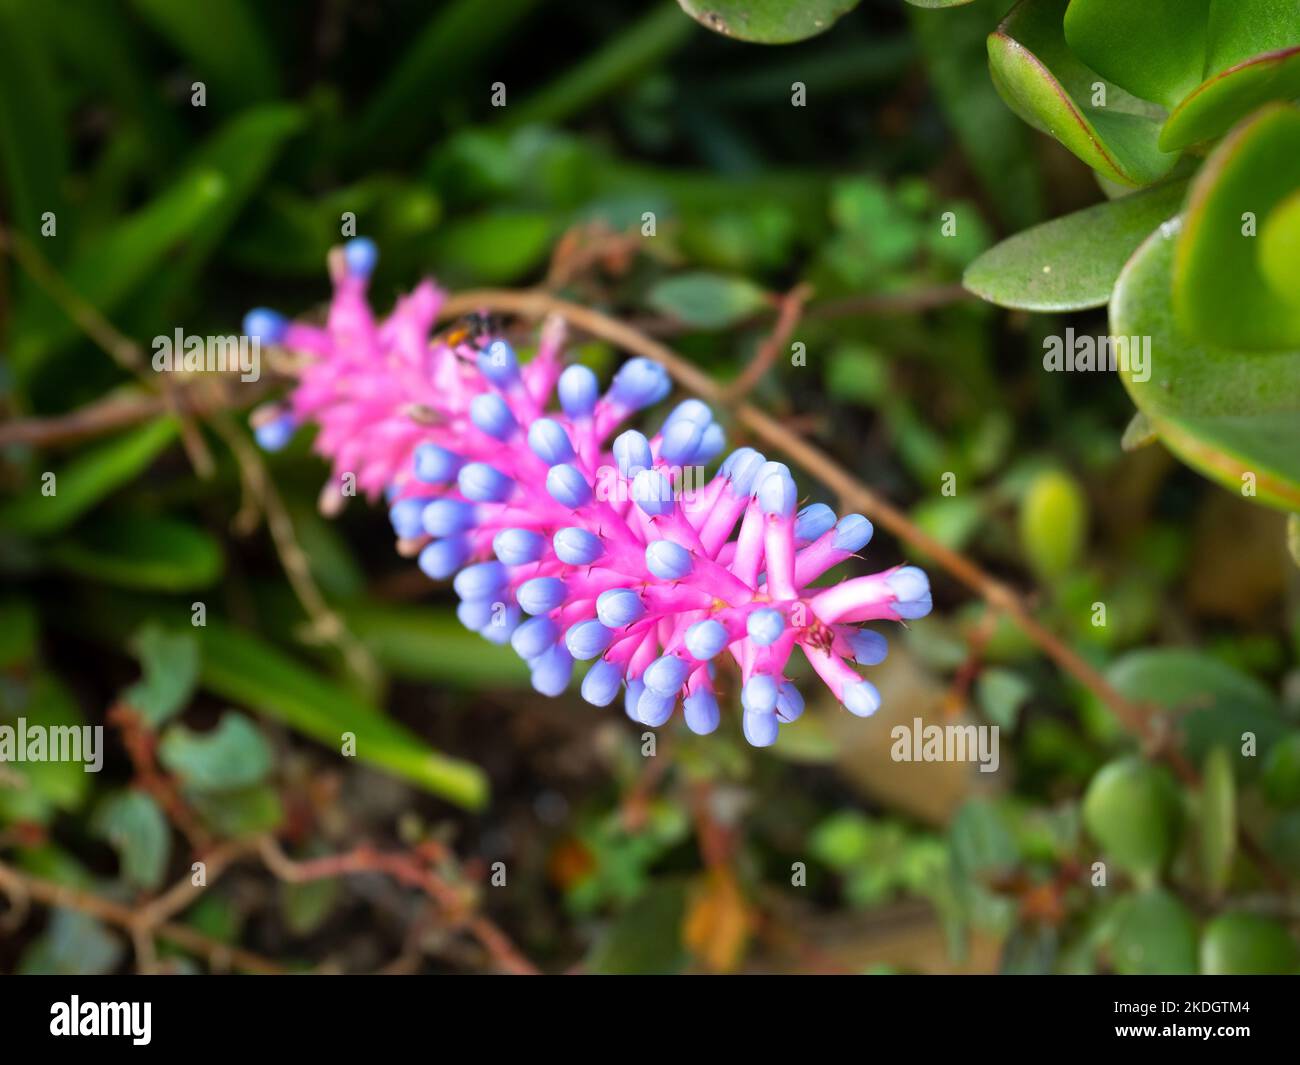 A Pink and Purple Flower like Matches, Knows as Bromeliad Endemic (Aechmea gamosepala) is in the Middle of the Garden Stock Photo